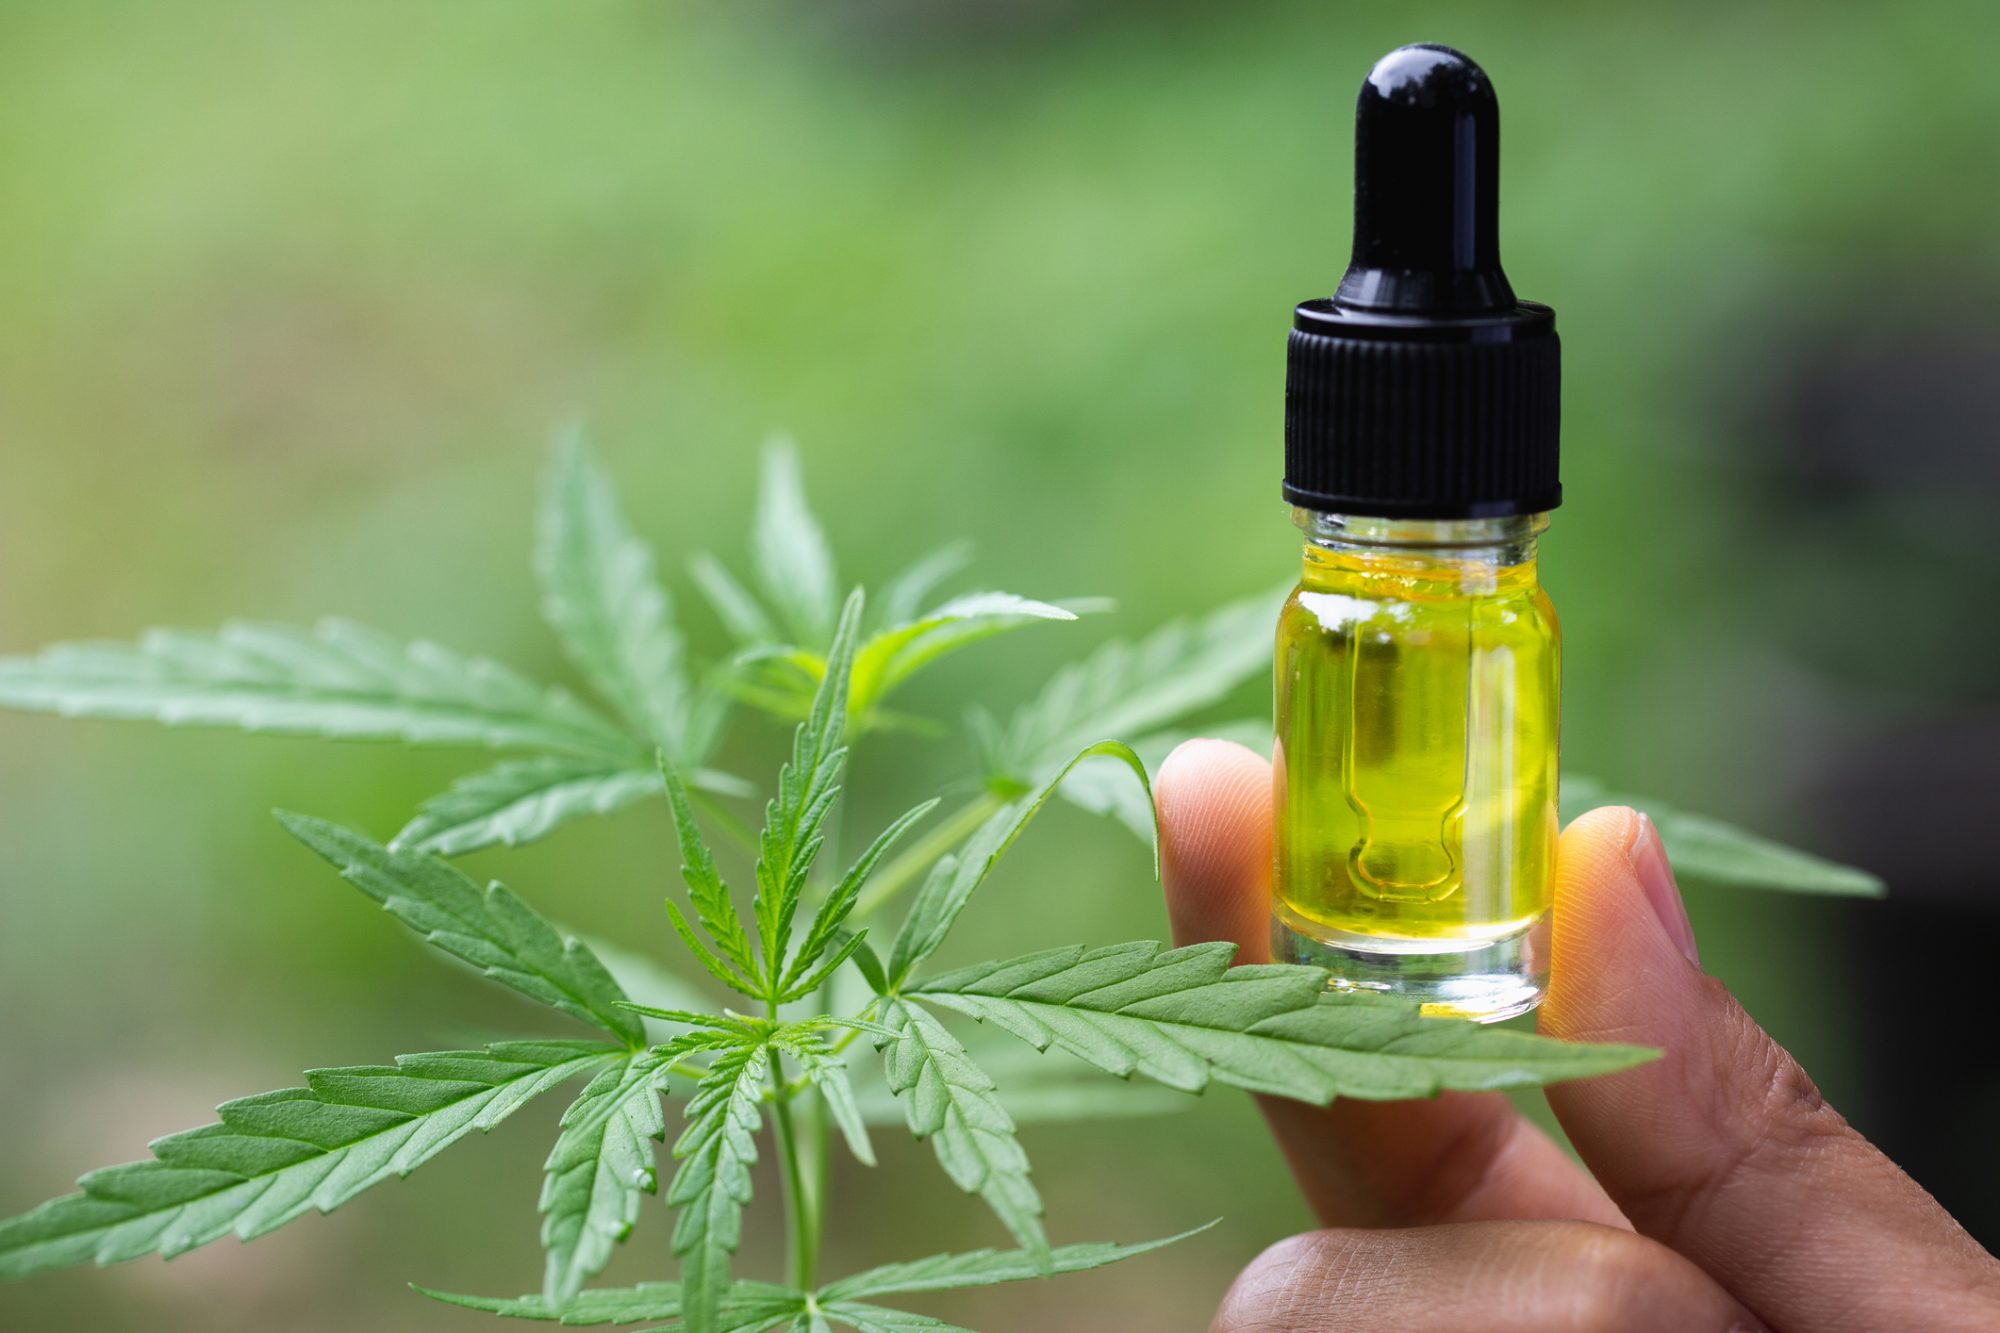 How To Use CBD Oil For The Treatment Of Inflammation